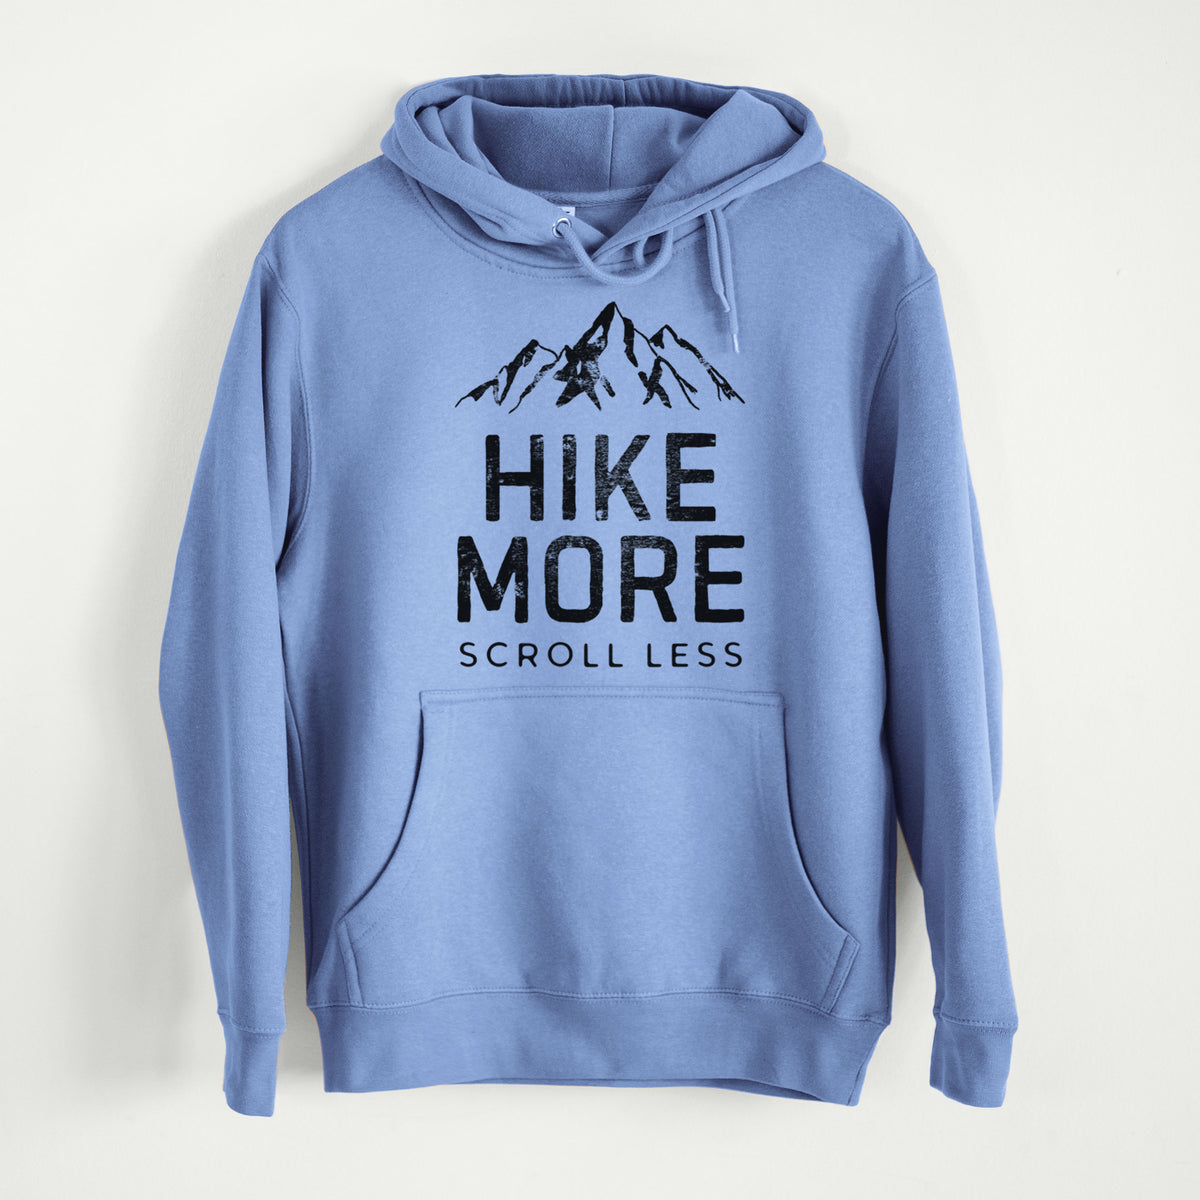 Hike More - Scroll Less  - Mid-Weight Unisex Premium Blend Hoodie